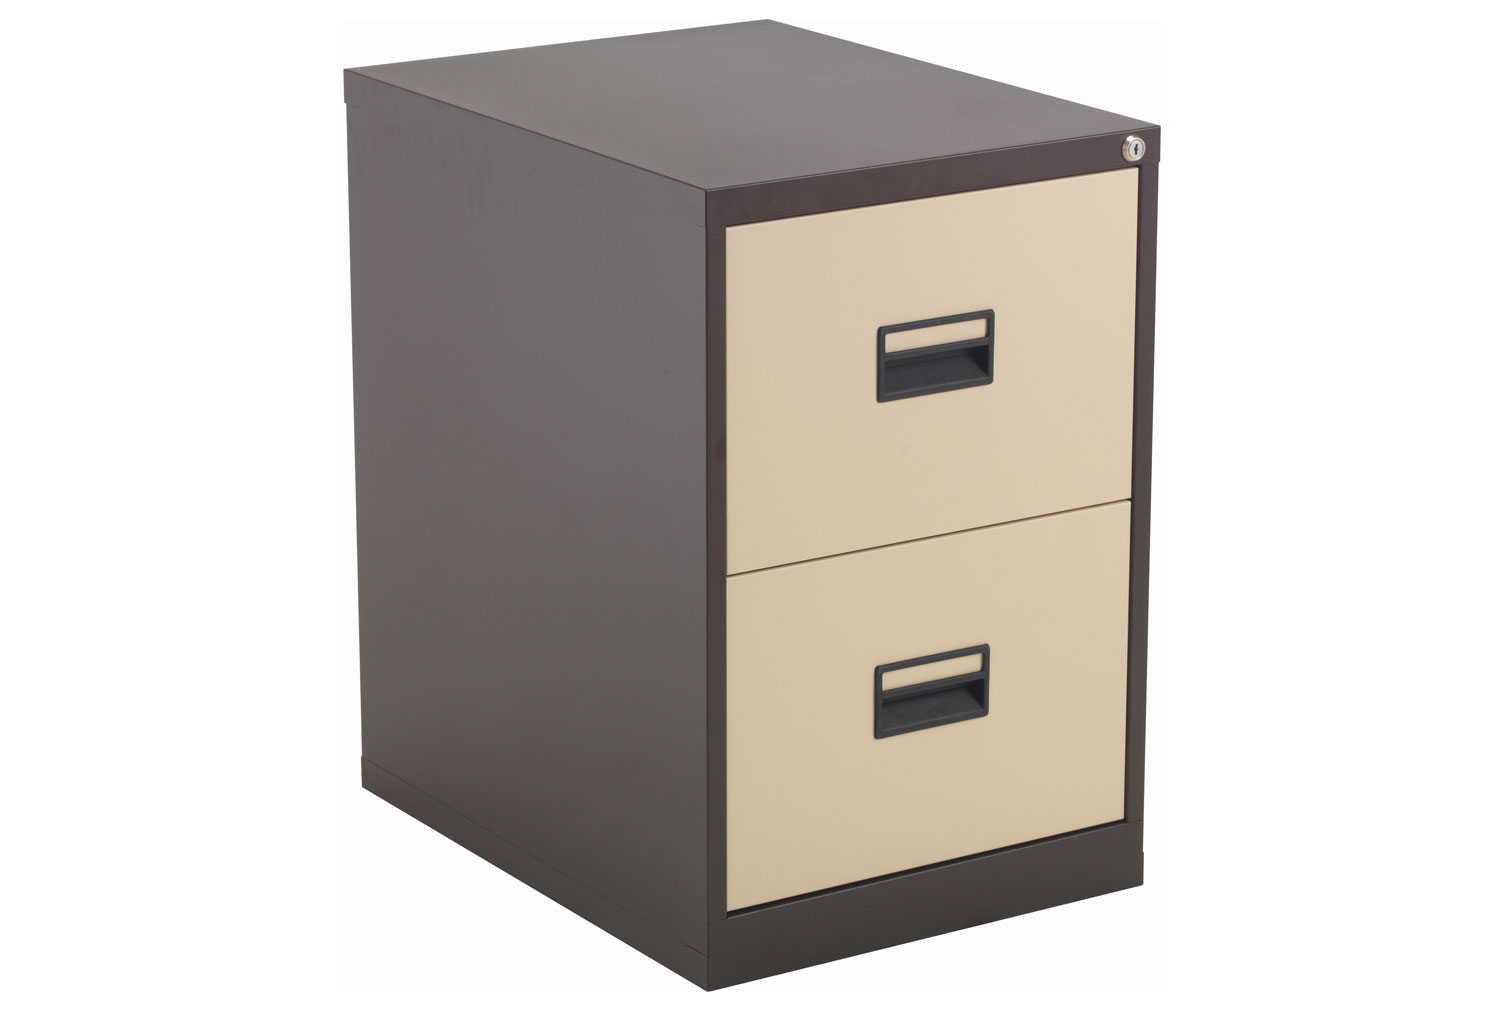 Value Line Metal Filing Cabinet, 2 Drawer - 47wx62dx70h (cm), Coffee/Cream